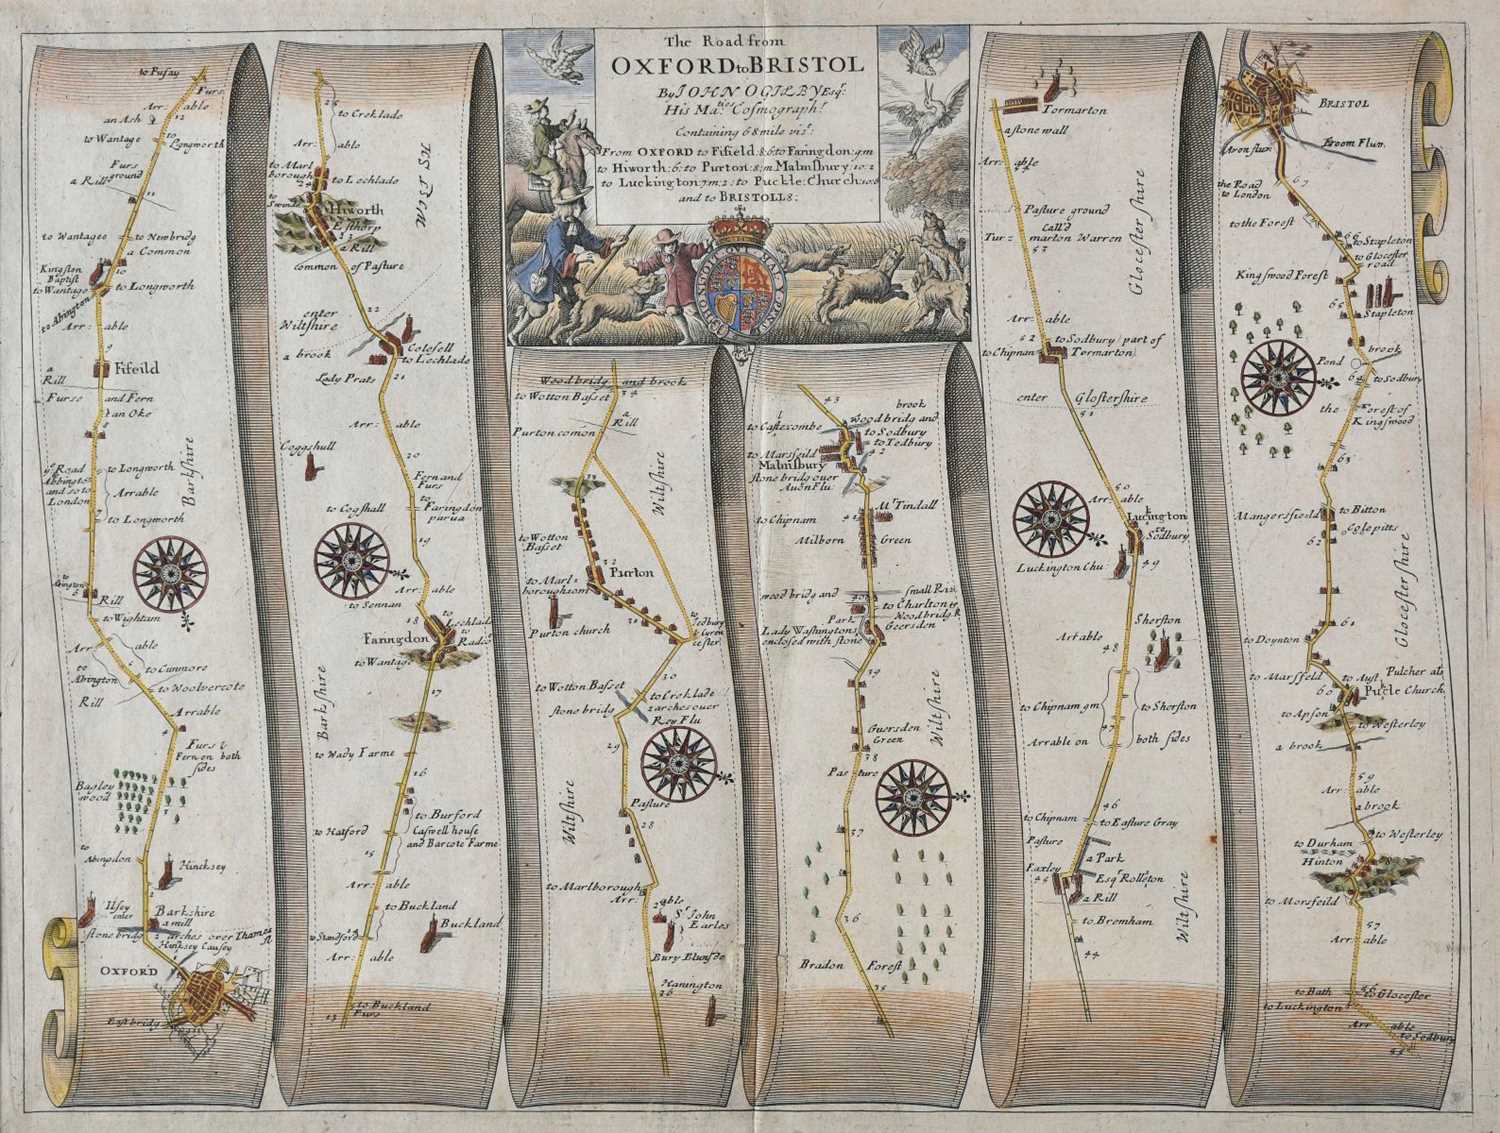 Lot 74 - Ogilby (John). The Road from Oxford to Bristol, 1675 or later